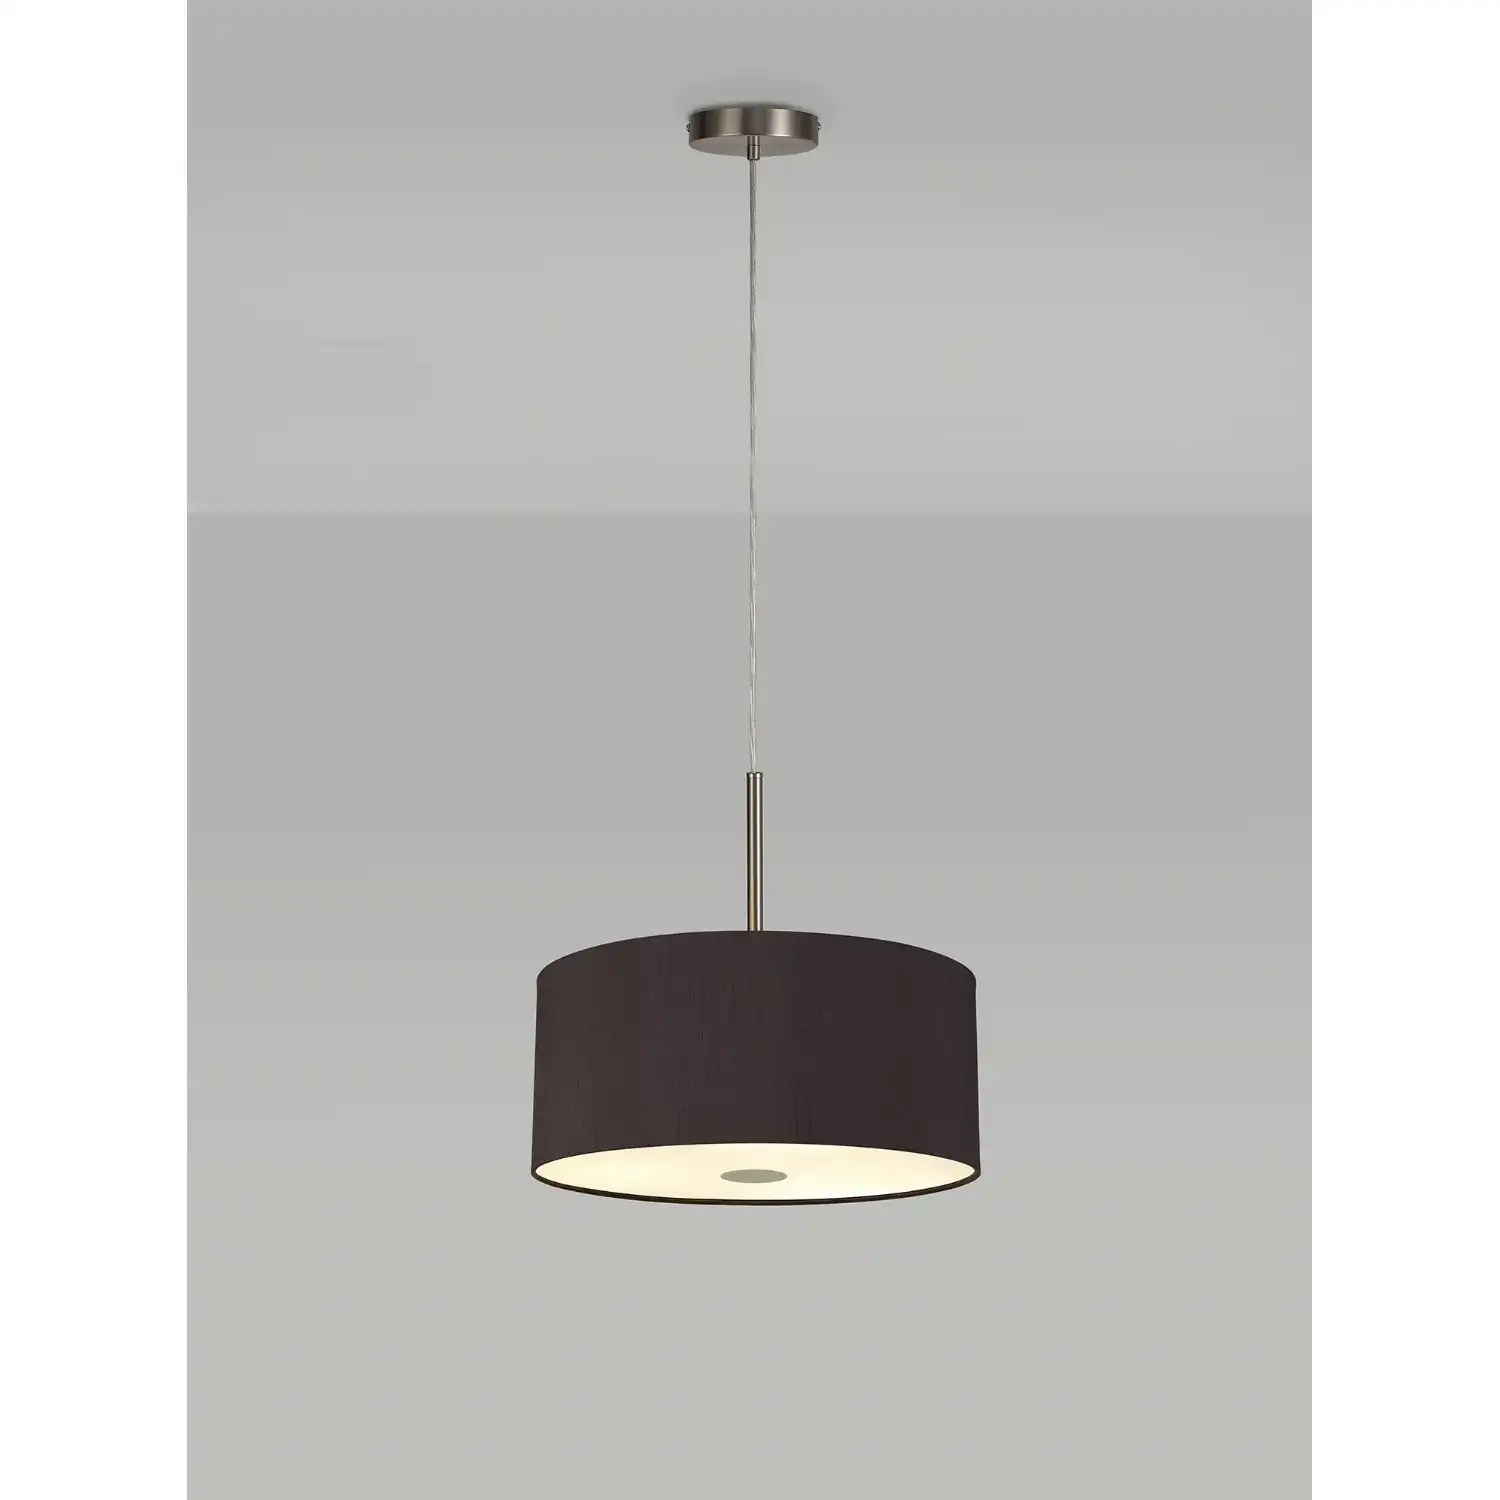 Baymont Satin Nickel 3m 5 Light E27 Single Pendant c w 400mm Dual Faux Silk Shade, Black Green Olive And 400mm Frosted SN Acrylic Diffuser